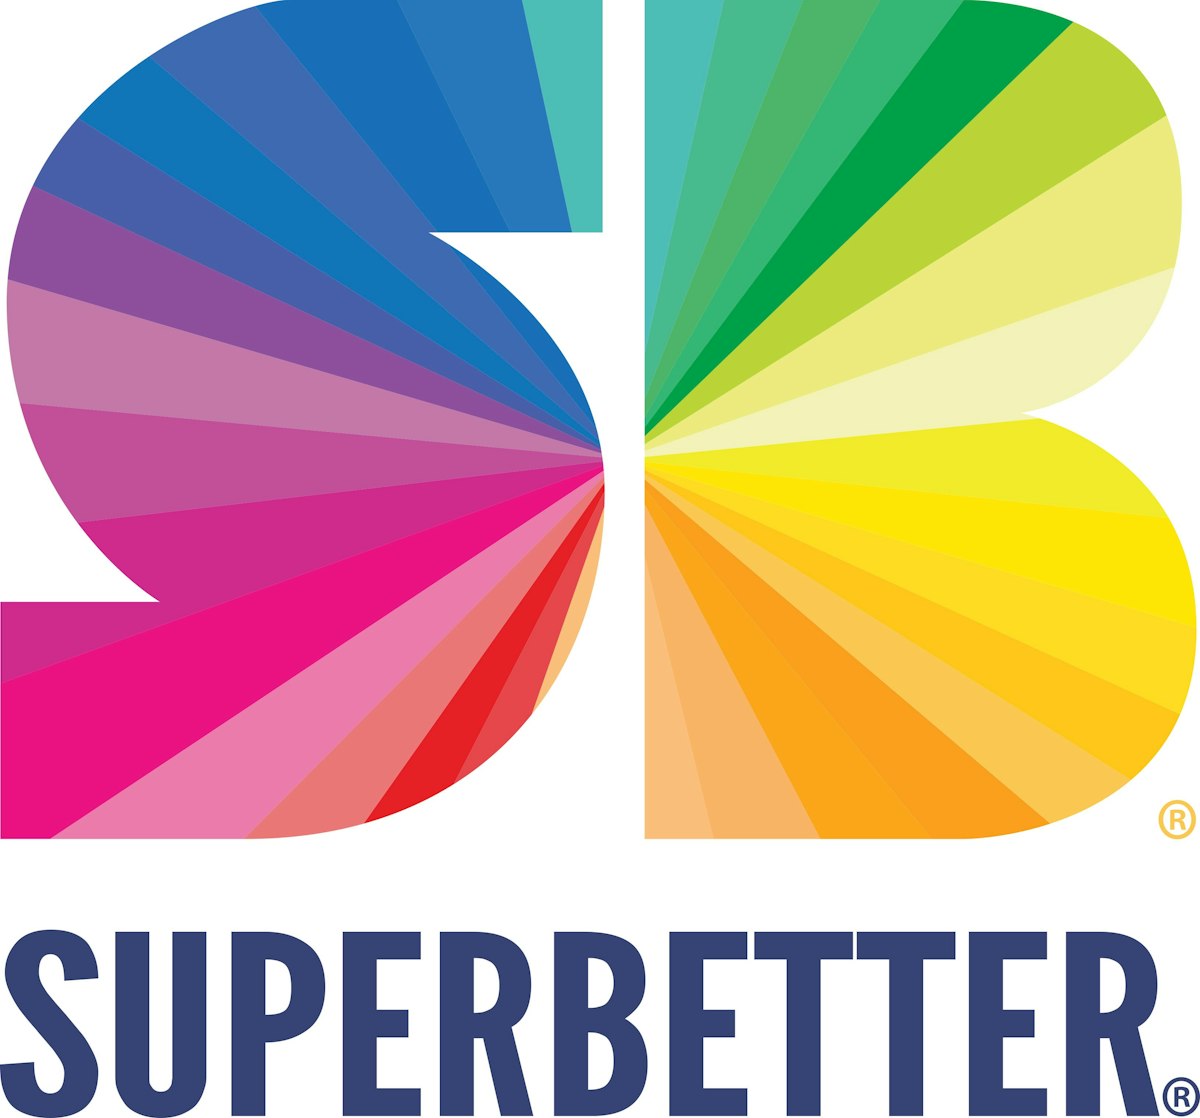 featured image - SuperBetter Improves Mental Health Using the Psychology of Gameplay